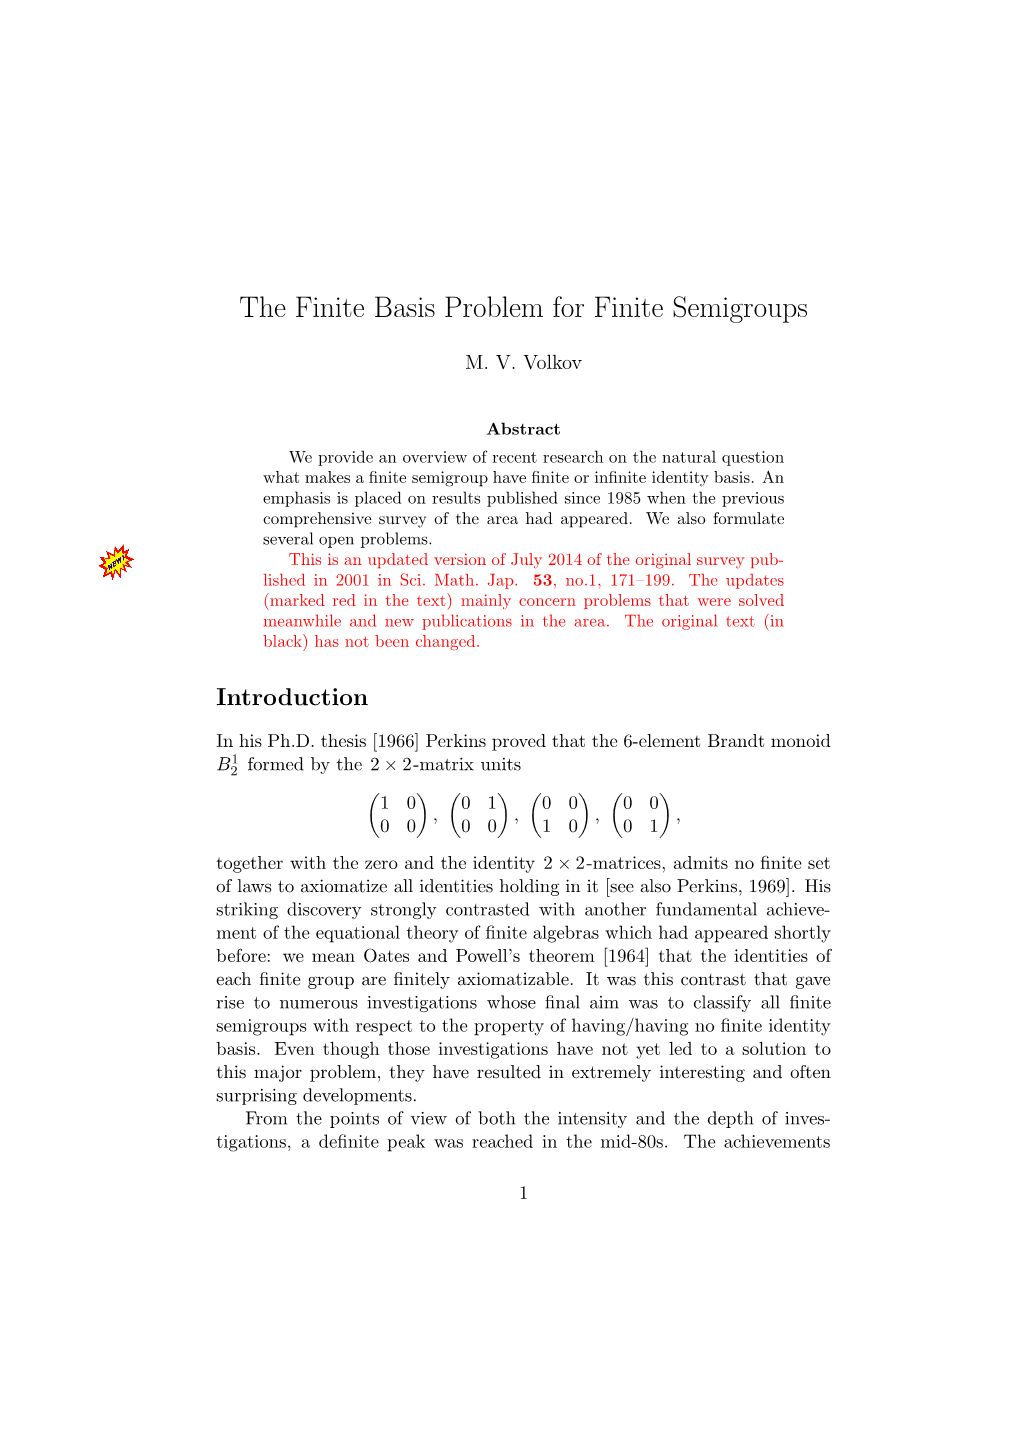 The Finite Basis Problem for Finite Semigroups